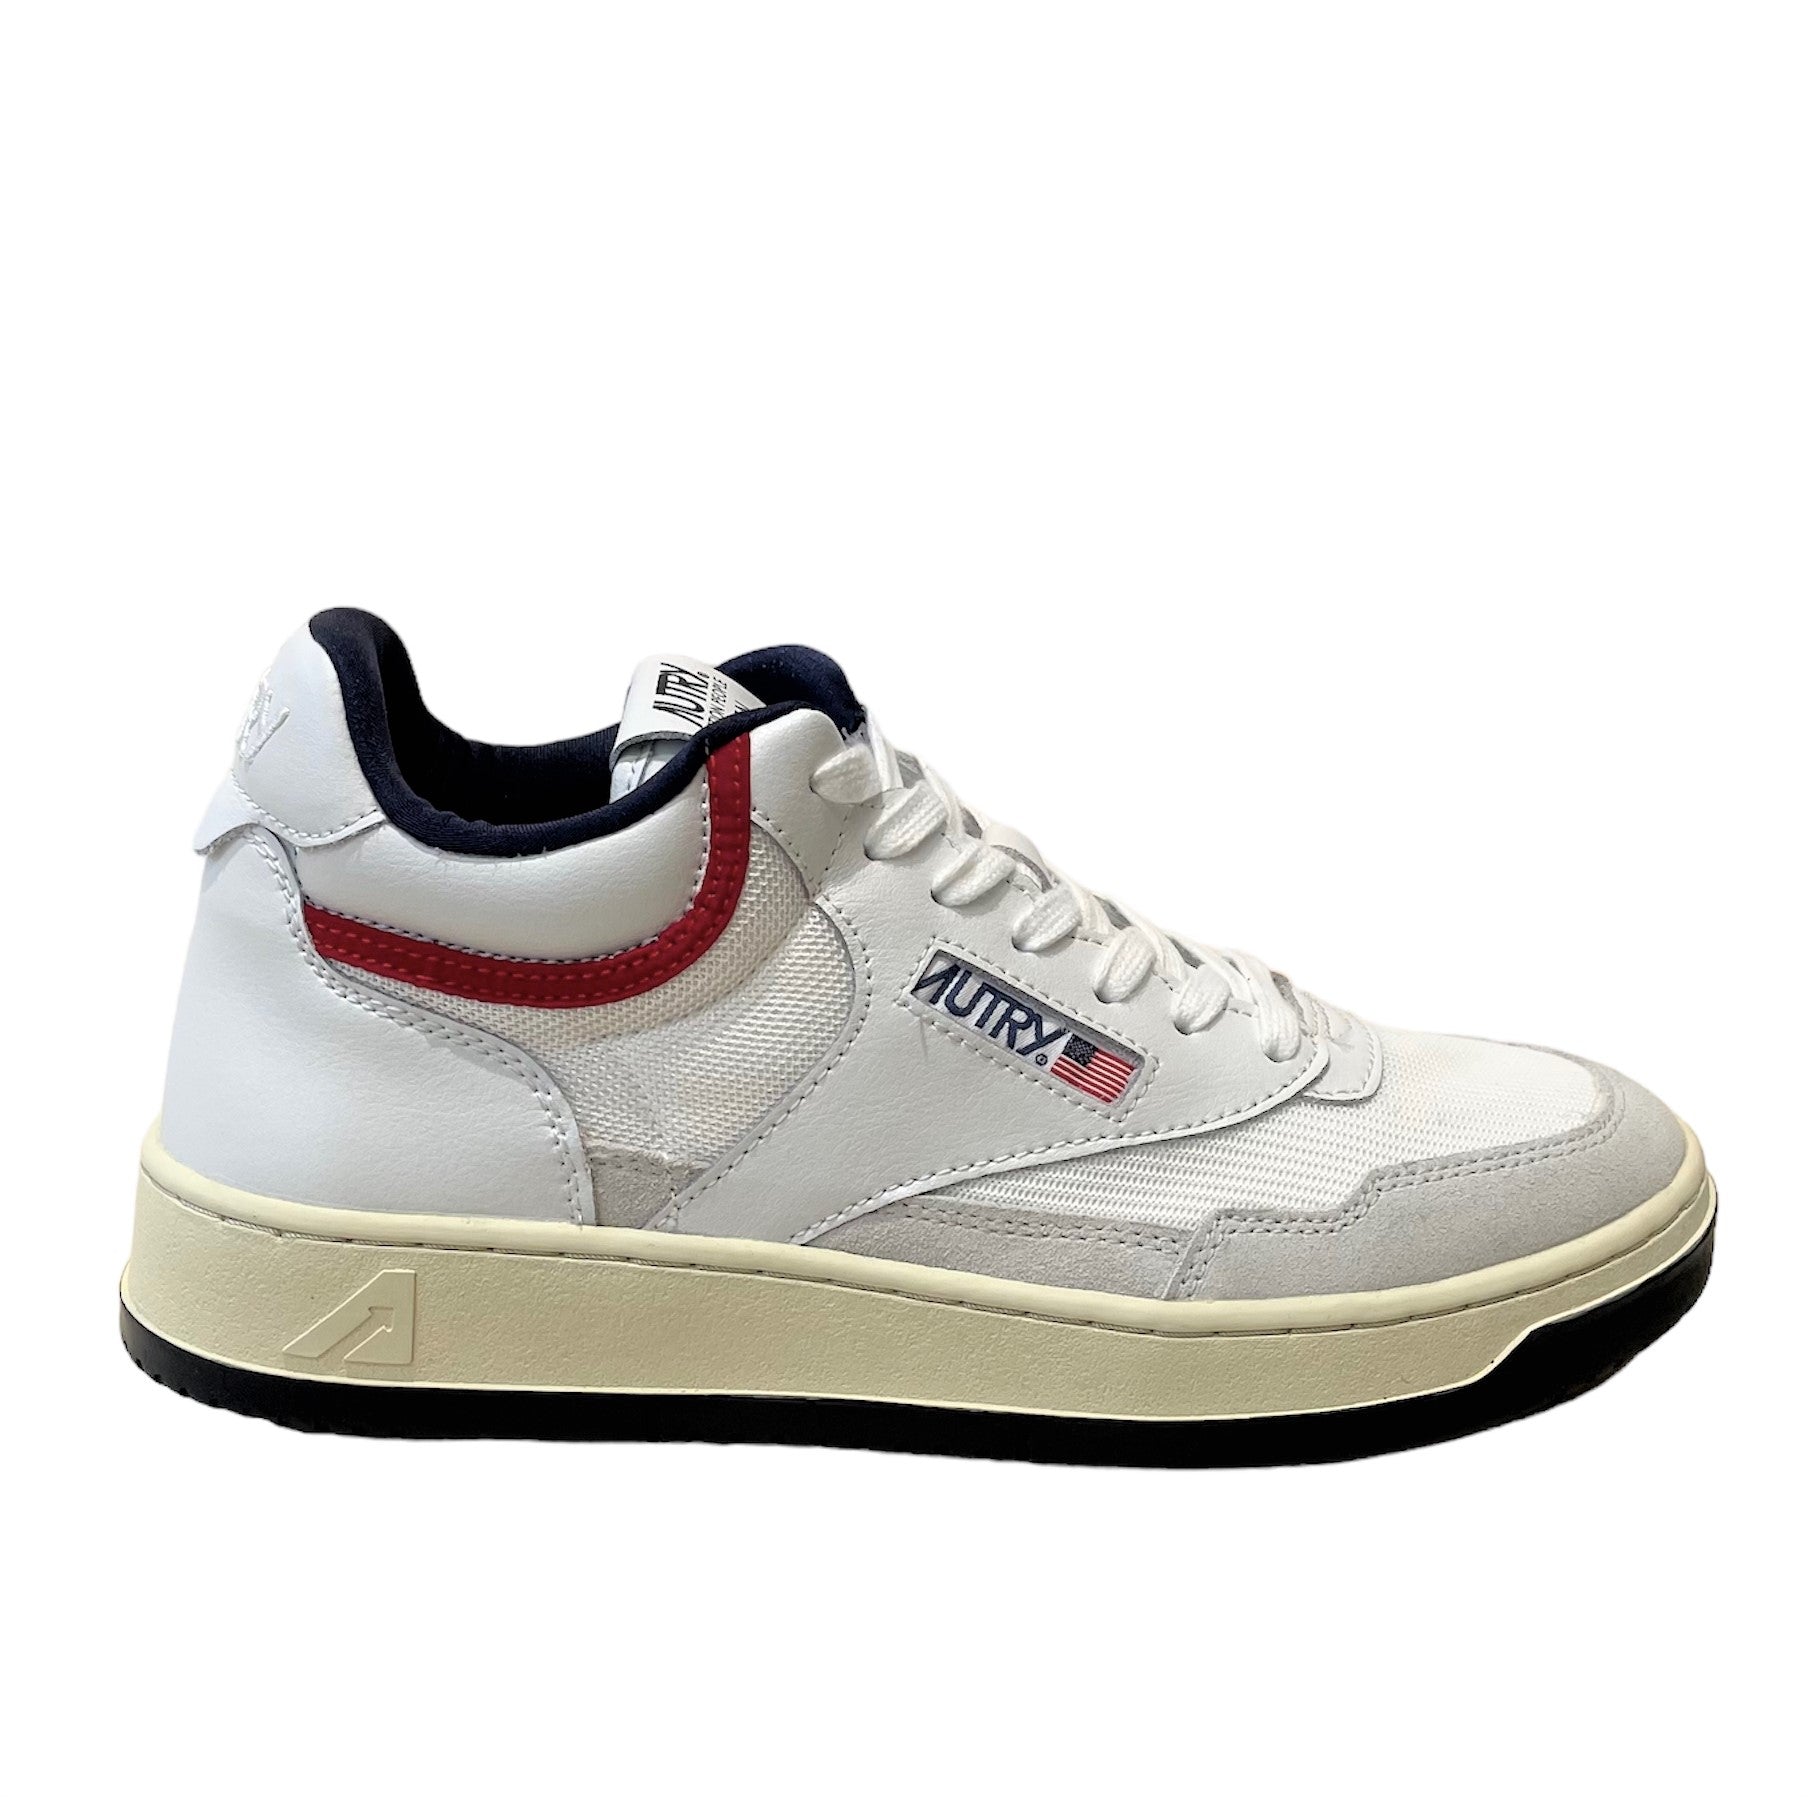 AUTRY Mid Man Open CE05 wht/red